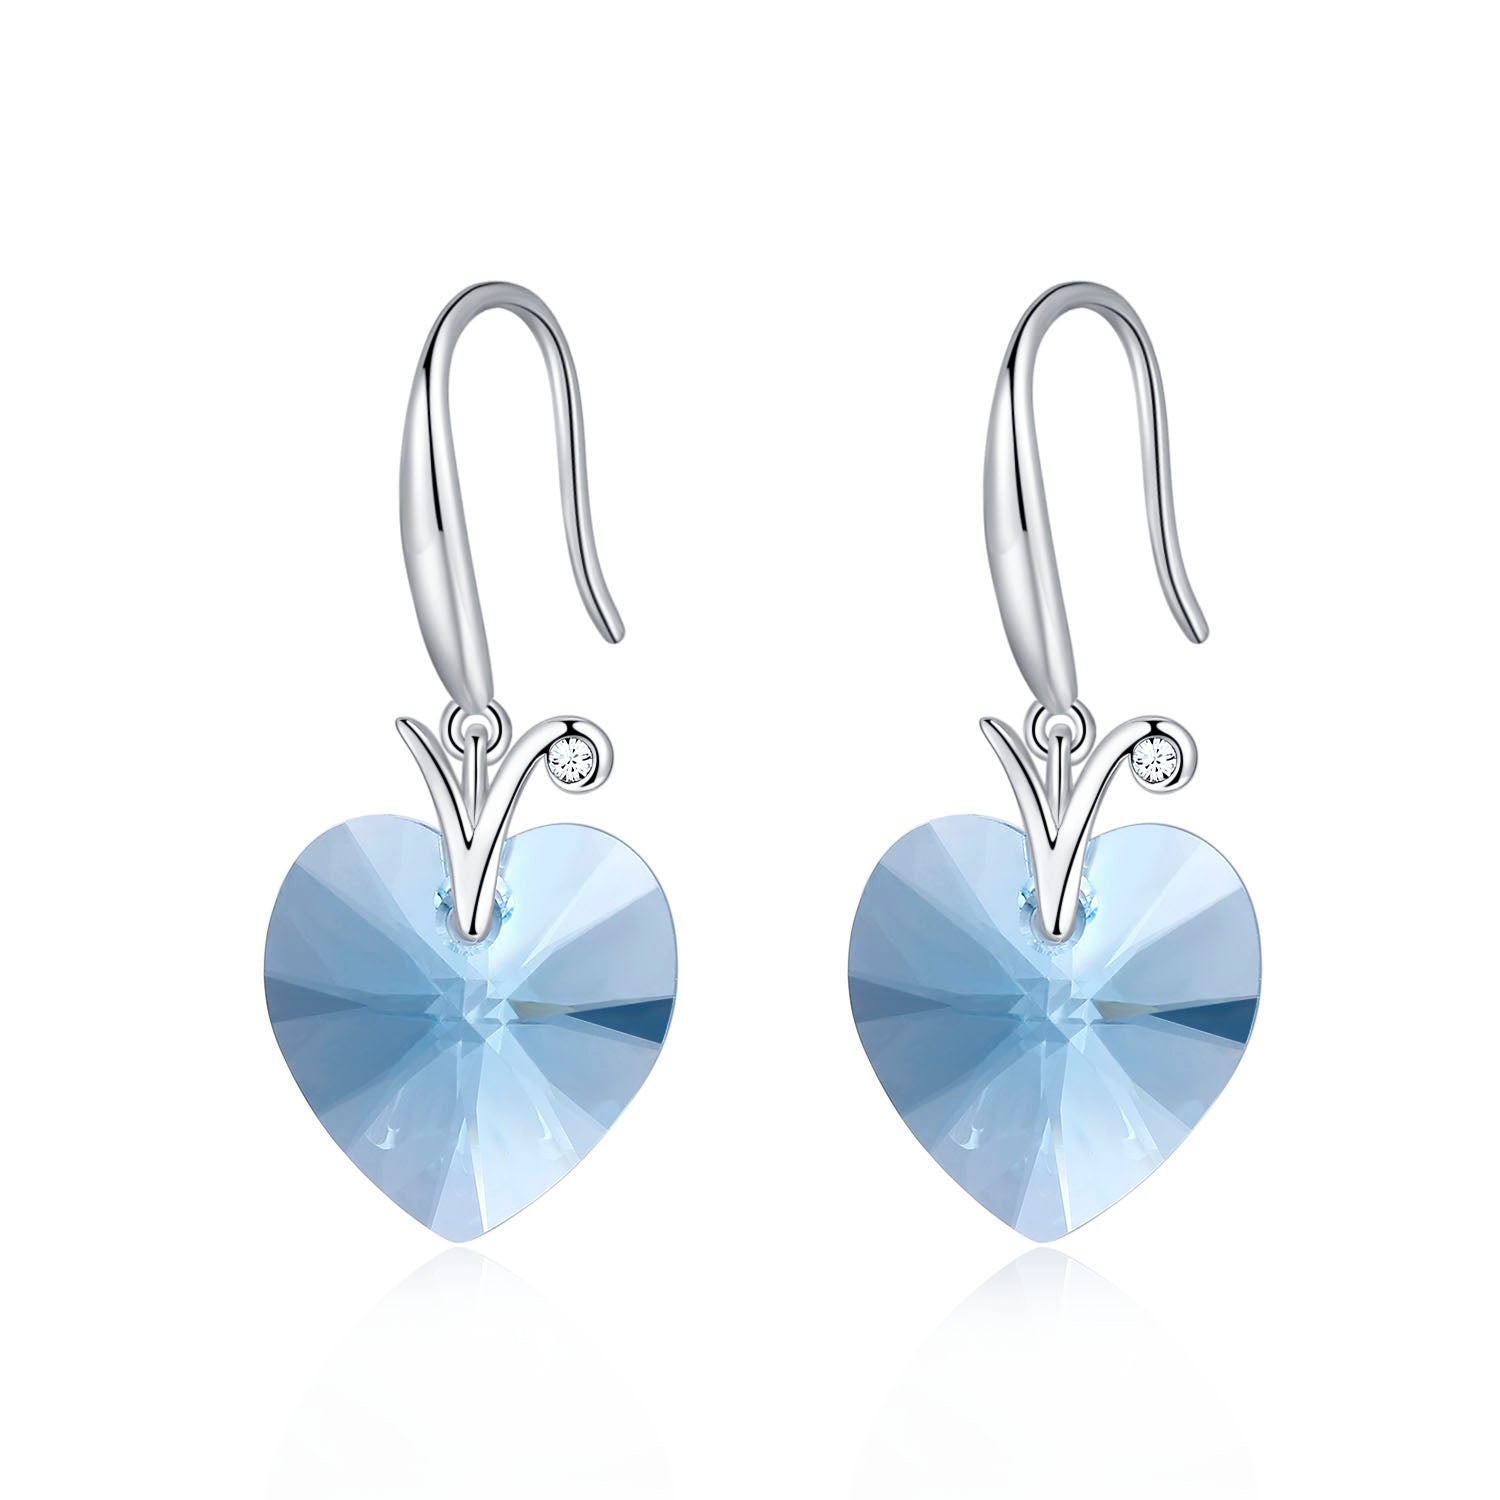 Pure Blue Heart Goddess Earrings with Swarovski Elements Crystals